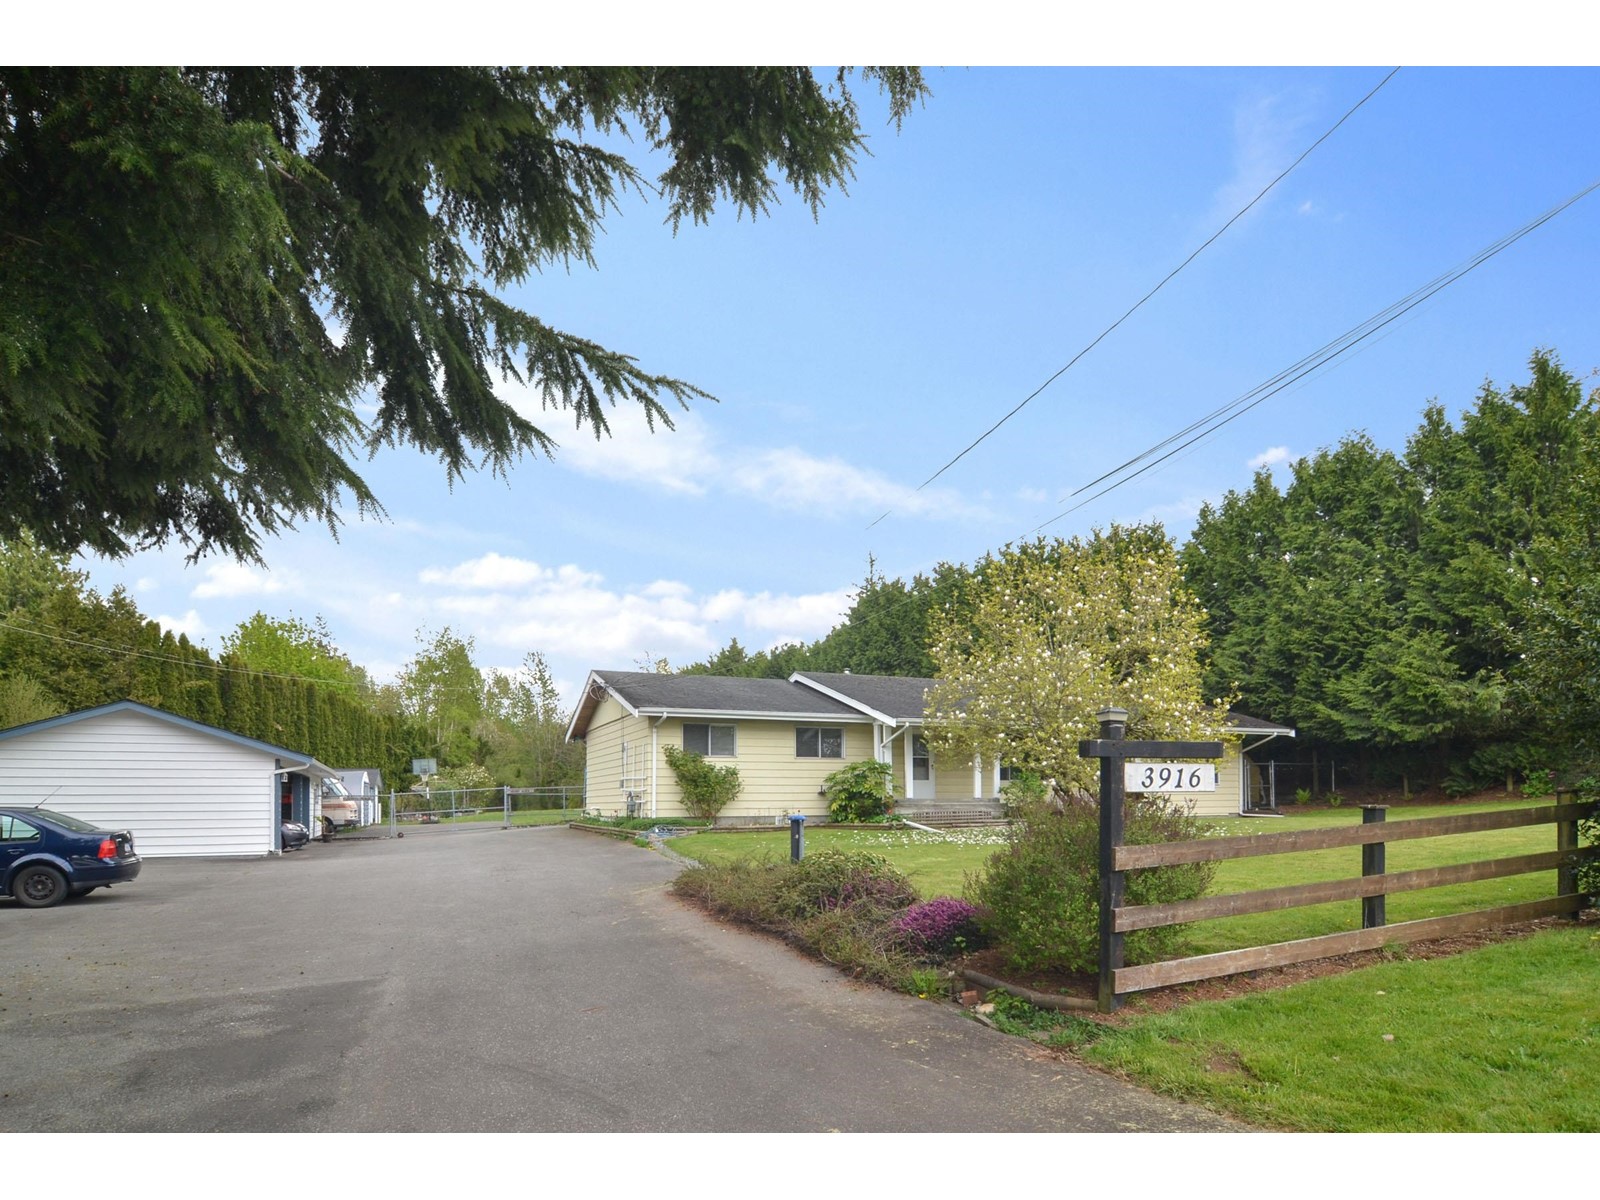 3916 240 STREET located in Langley, British Columbia